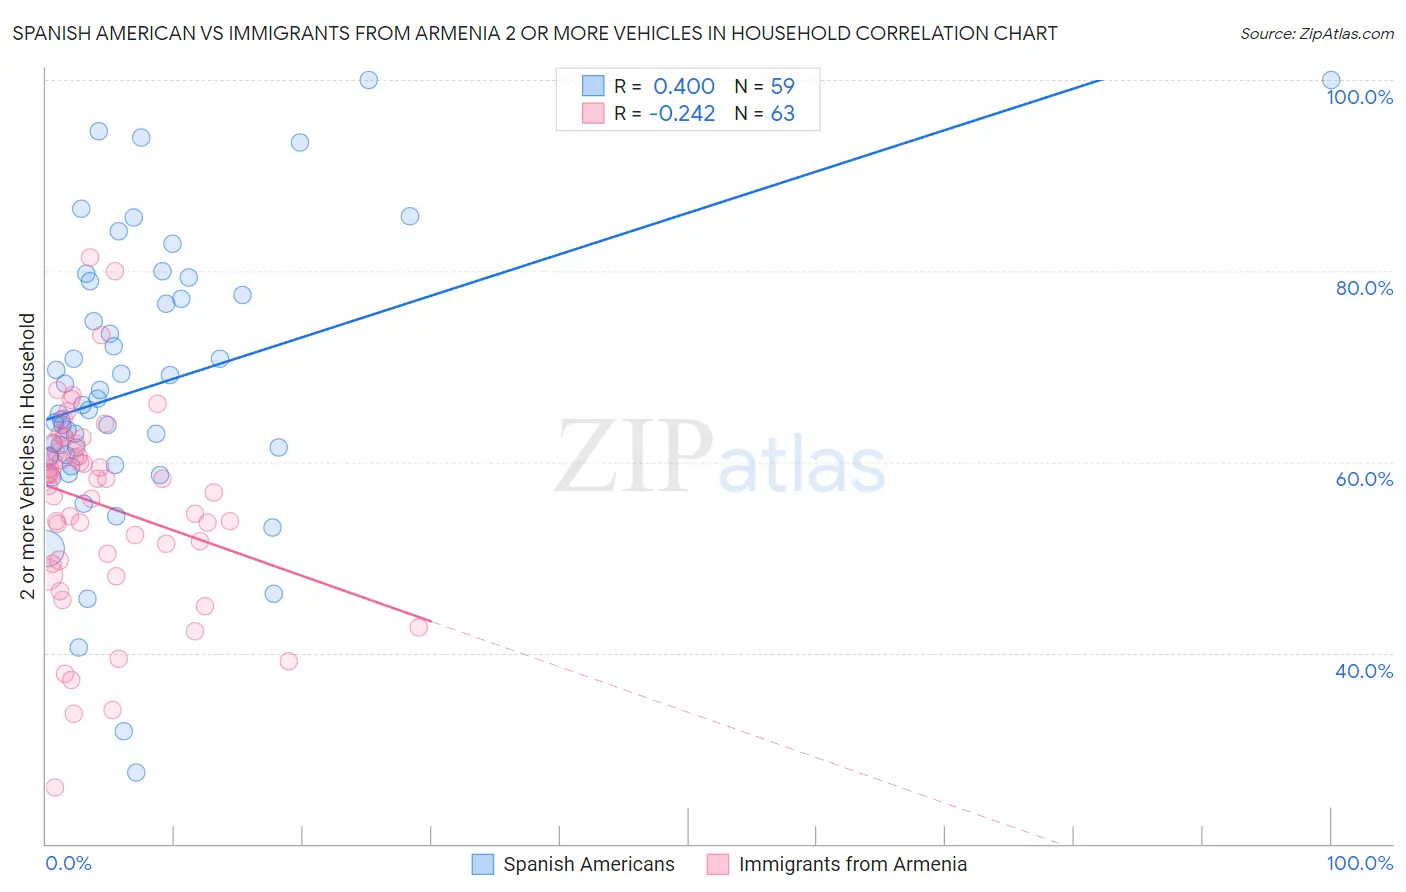 Spanish American vs Immigrants from Armenia 2 or more Vehicles in Household